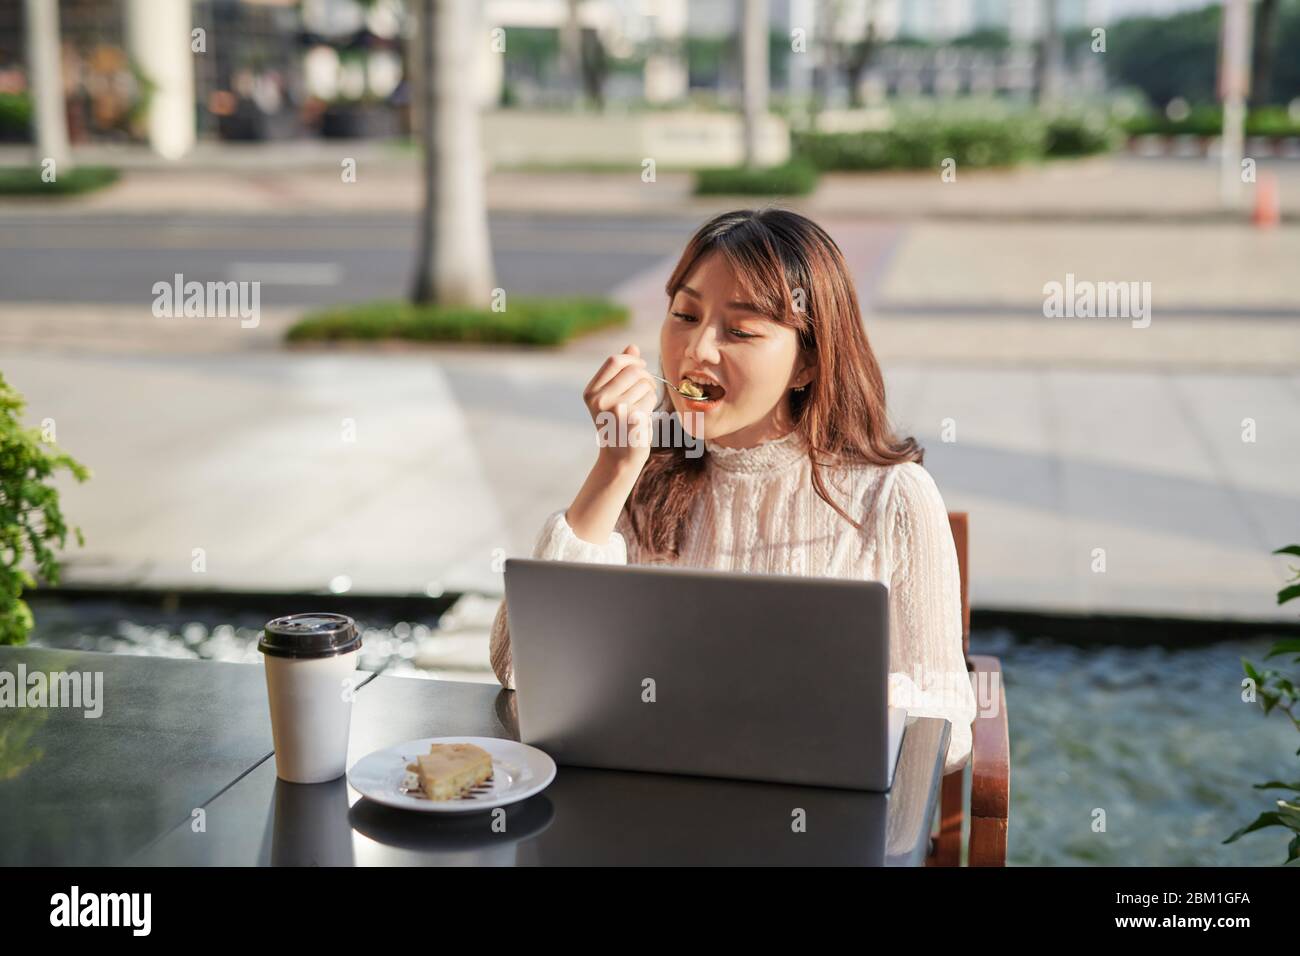 Beautiful woman eating delicious banana cake in a coffee shop. Girl in front of laptop in a coffee shop. Girl enjoying tasty cake. Stock Photo